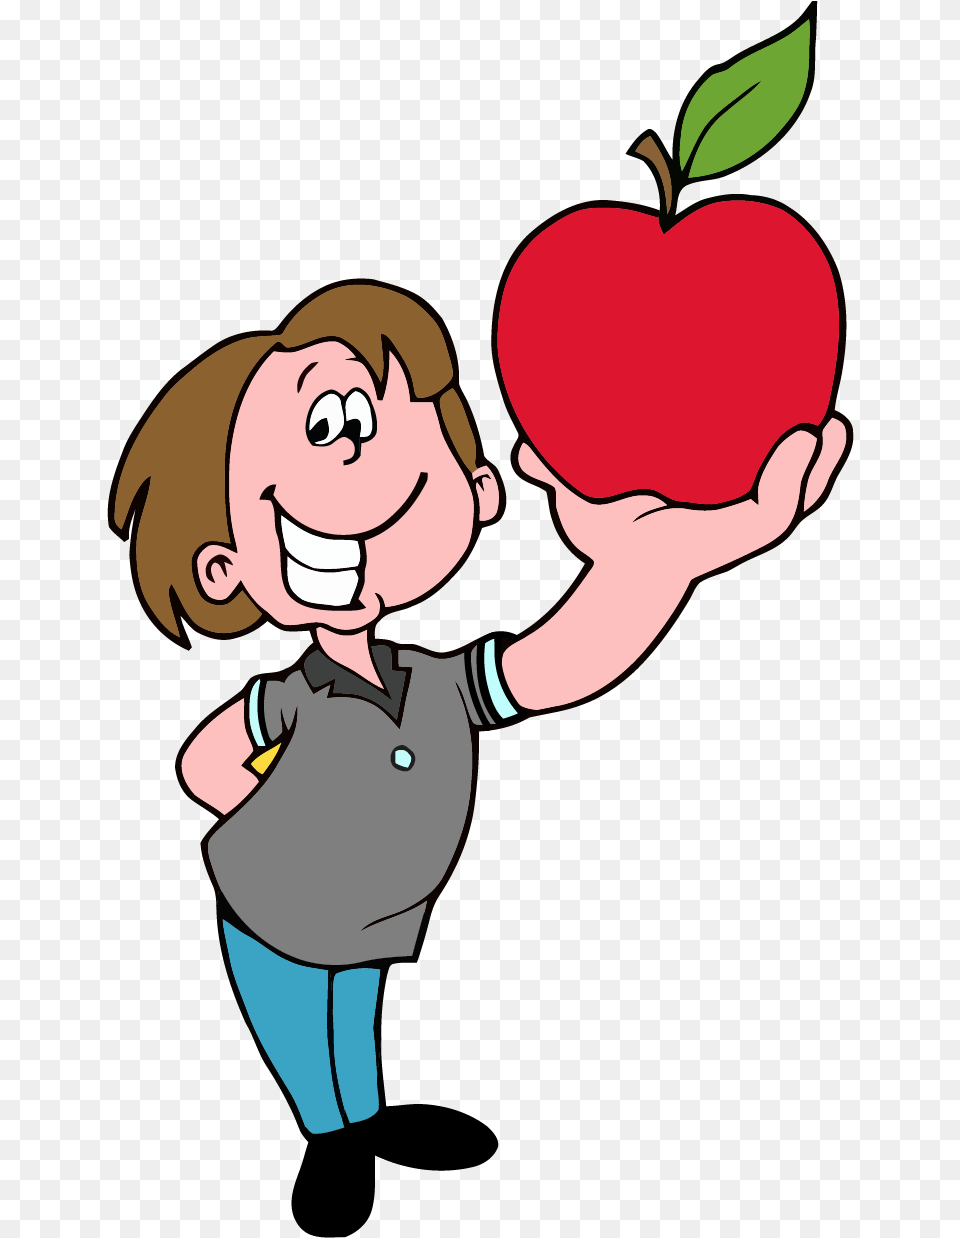 School Boy Apple Clipart Holding An Apple Clip Art Example Of A Rhyming Poem, Cartoon, Baby, Person, Face Png